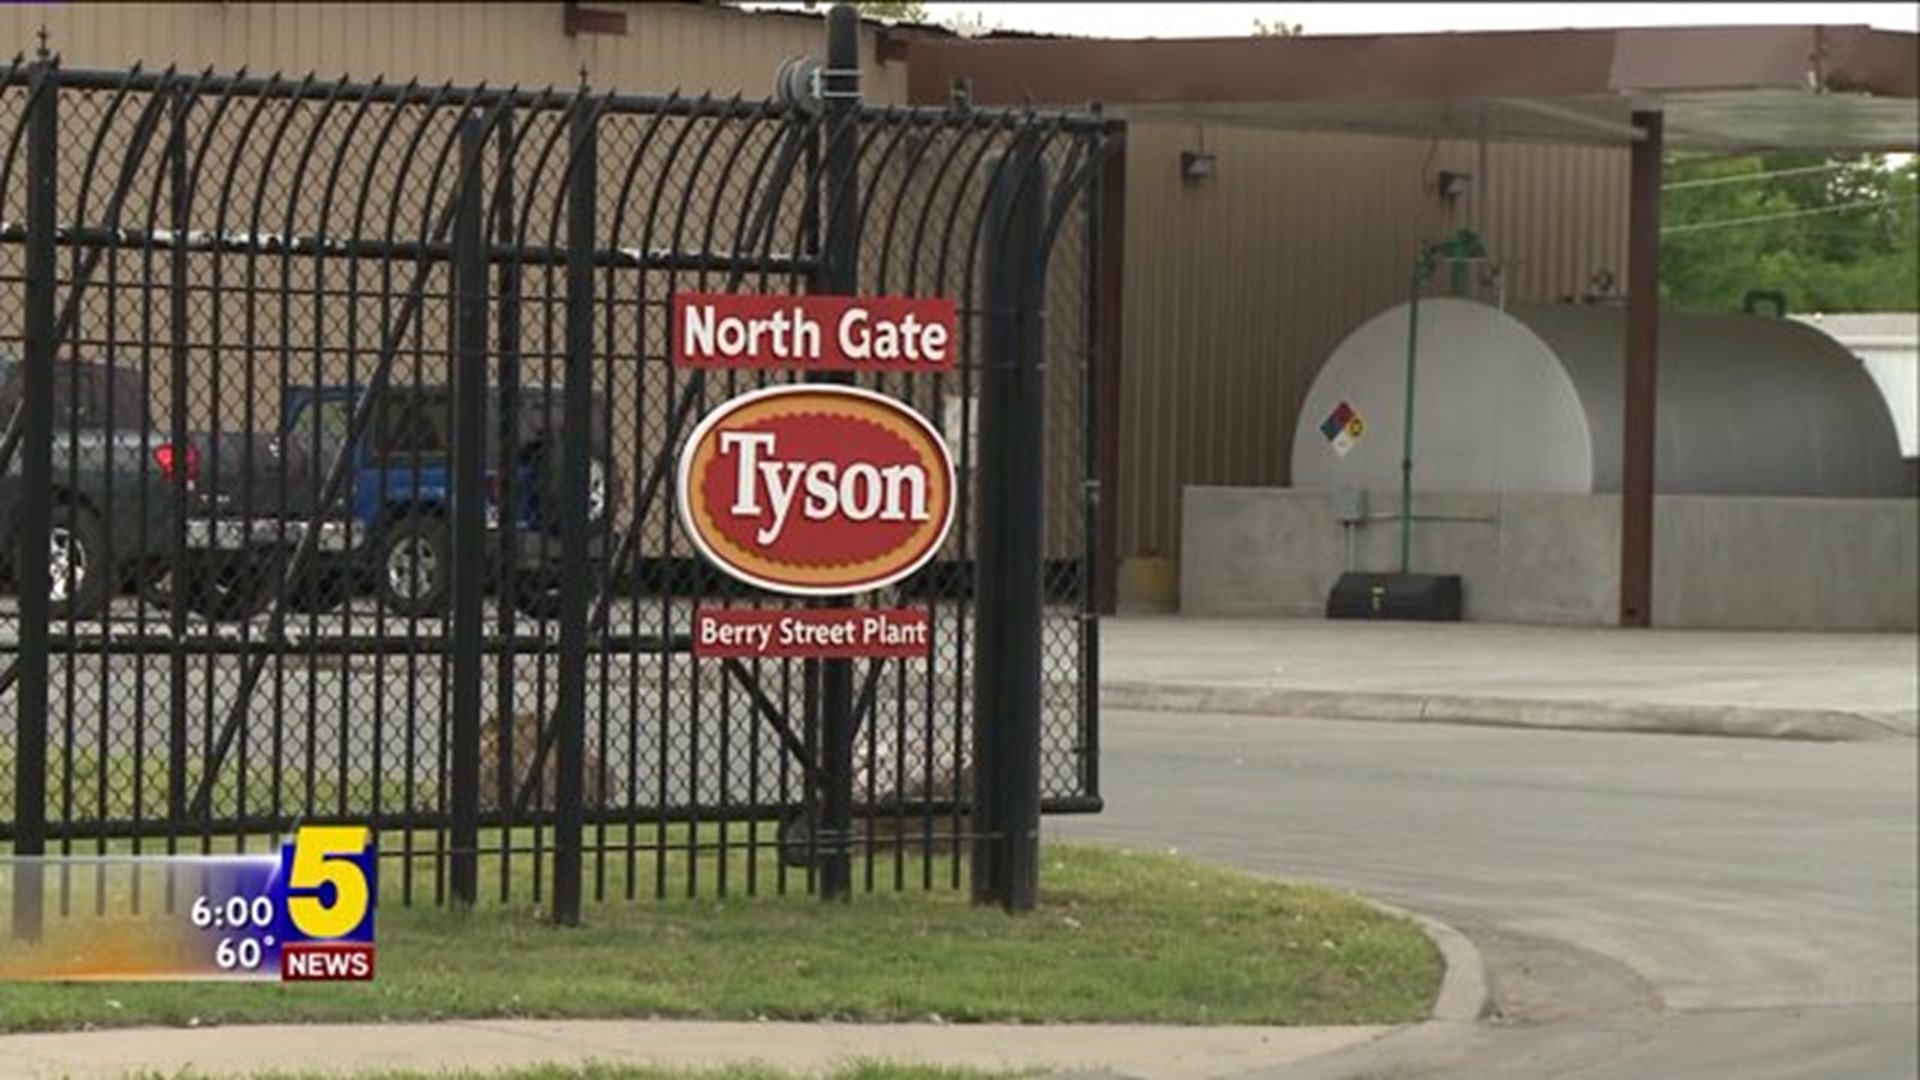 Tyson To Phase Out Human Antibiotics From U.S Broiler Chicken Flocks